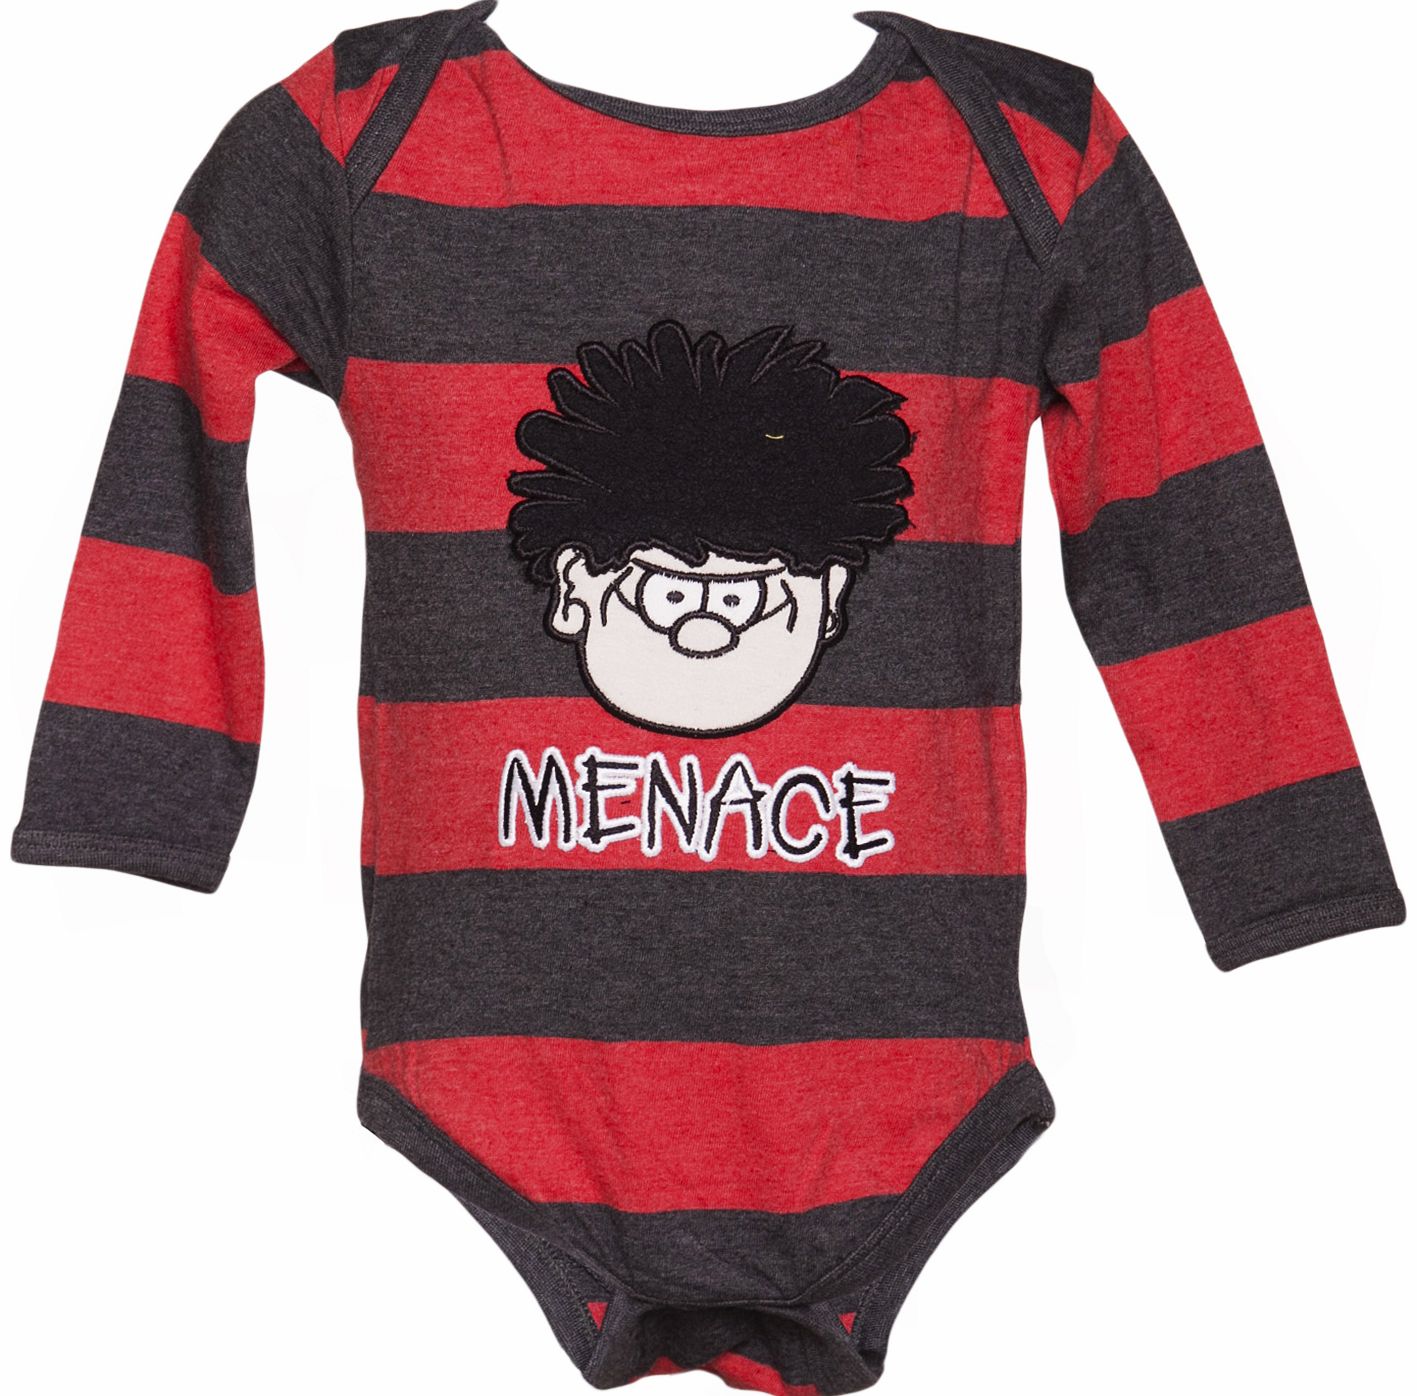 Kids Black And Red Dennis The Menace Babygrow